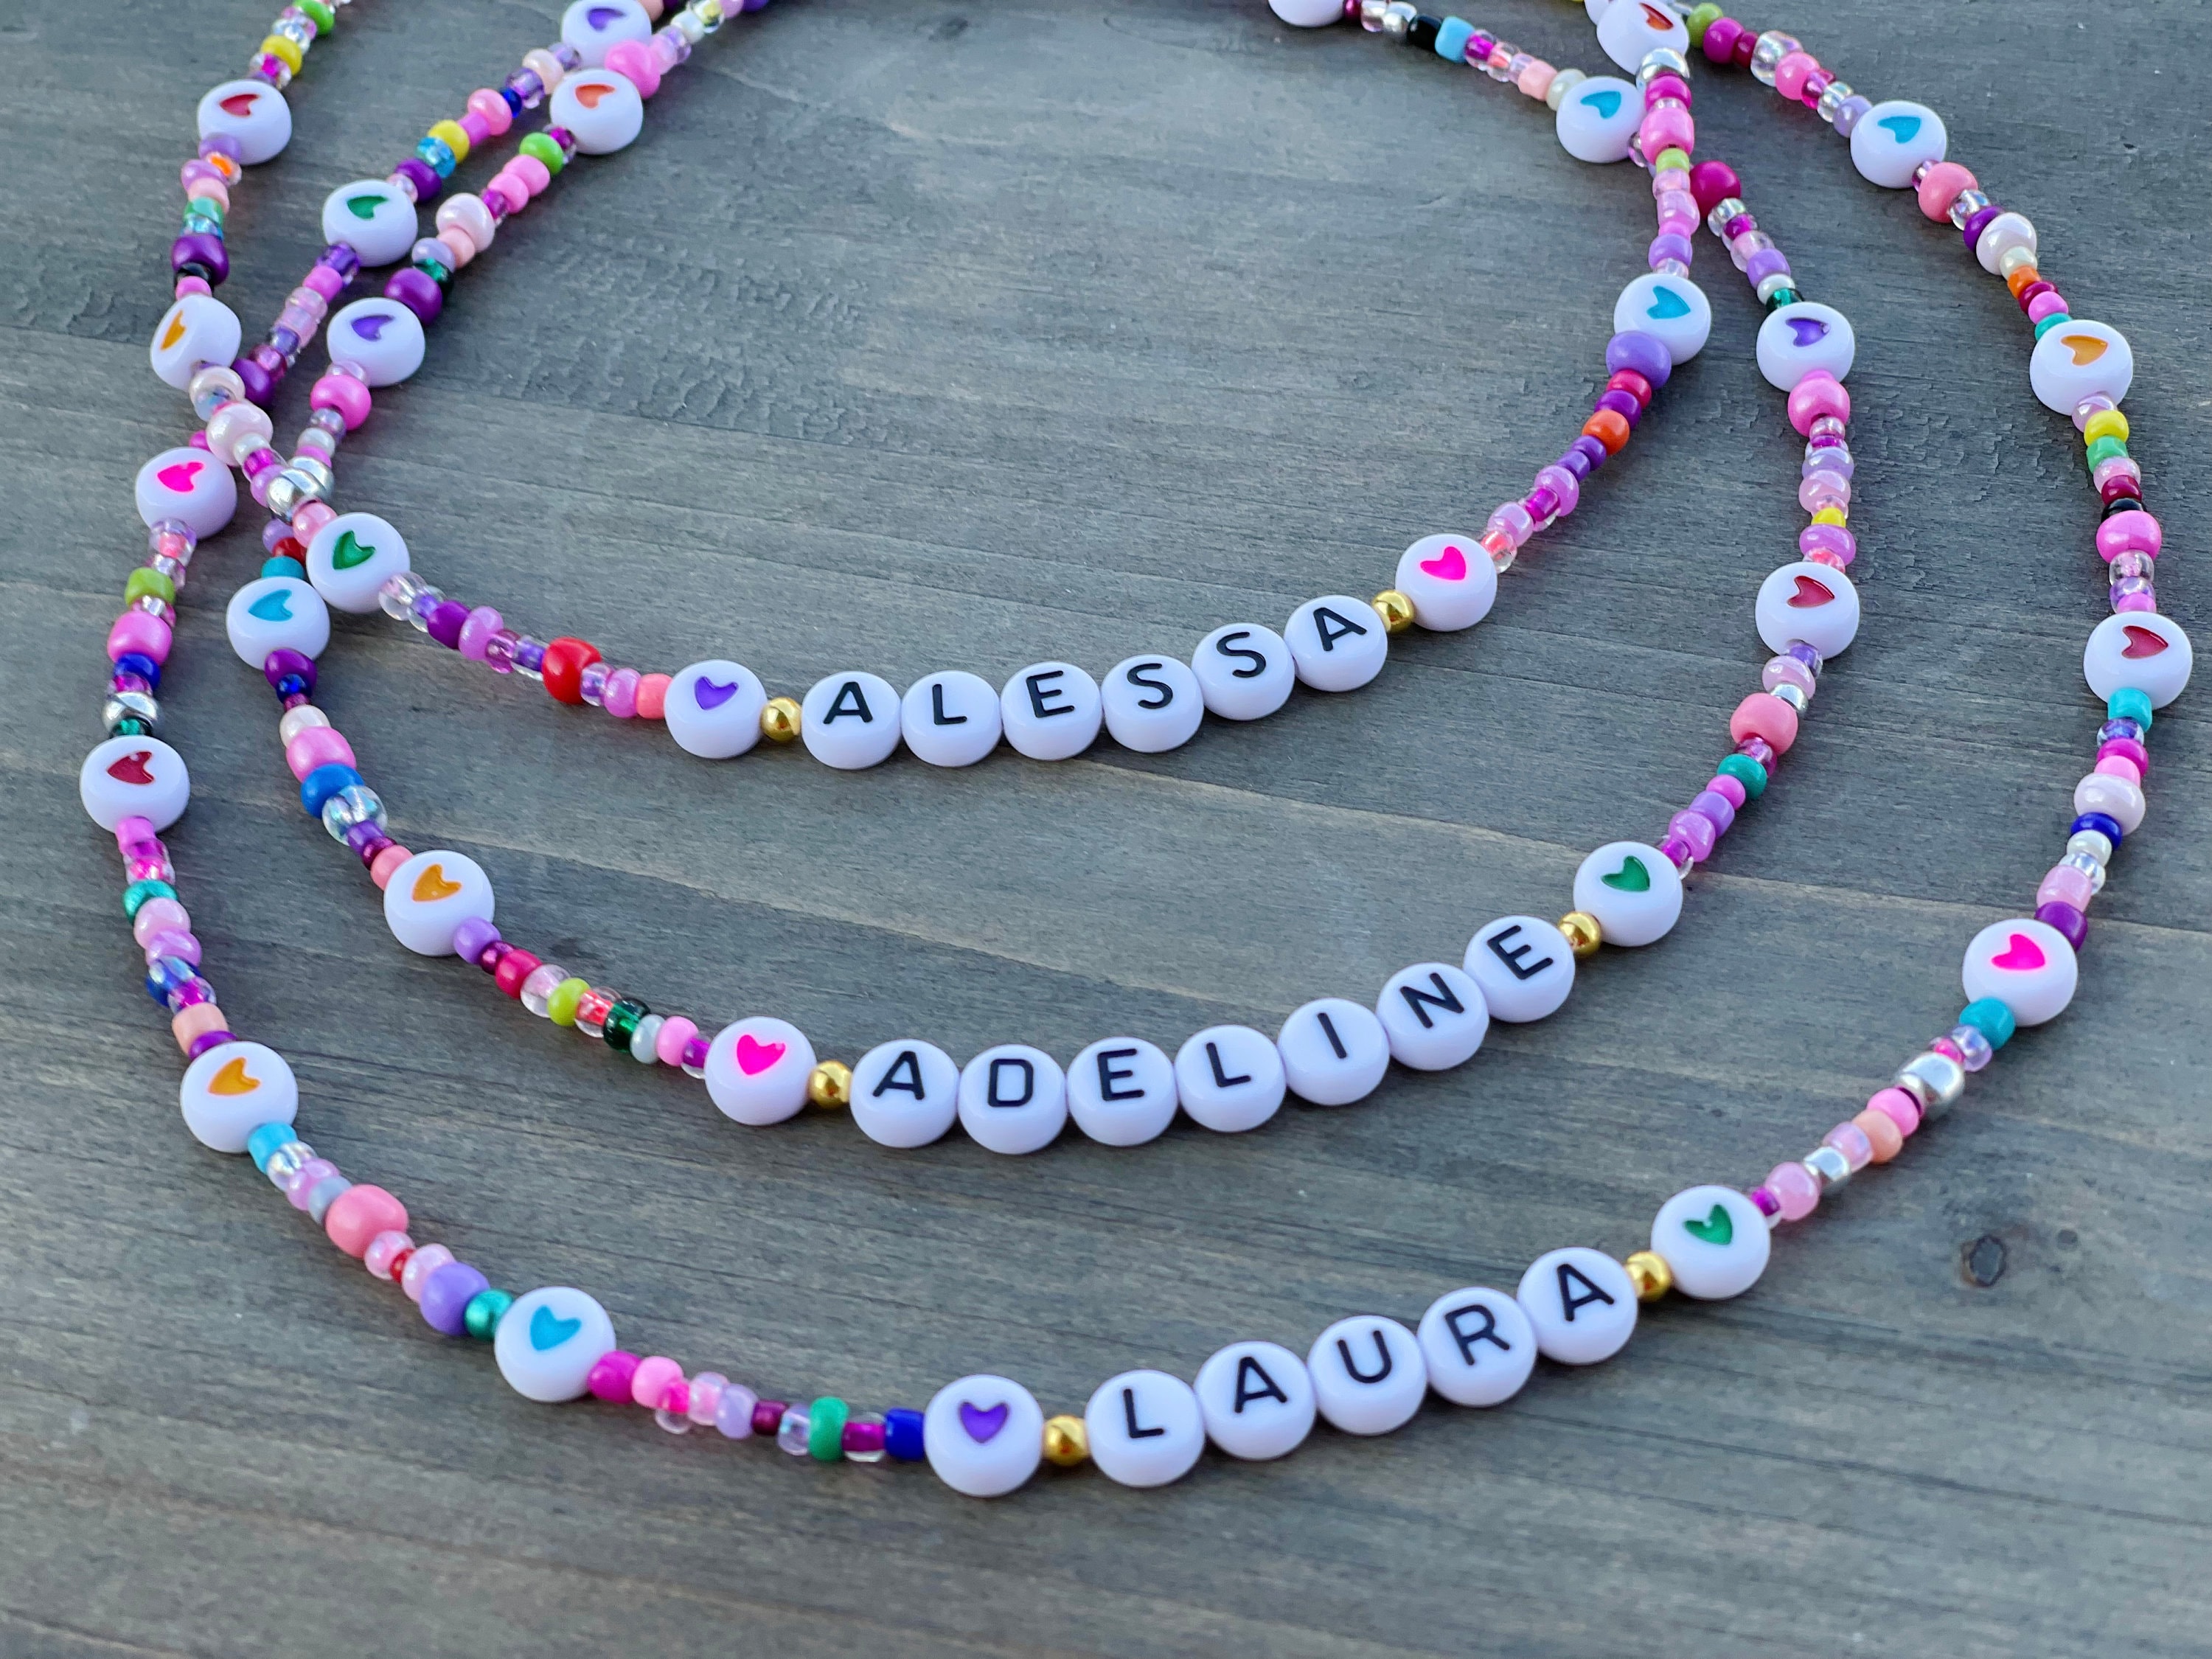 Purple Kids Beads Charm 40cm Necklace with A Bracelet - Free Shipping -  Puddle Season